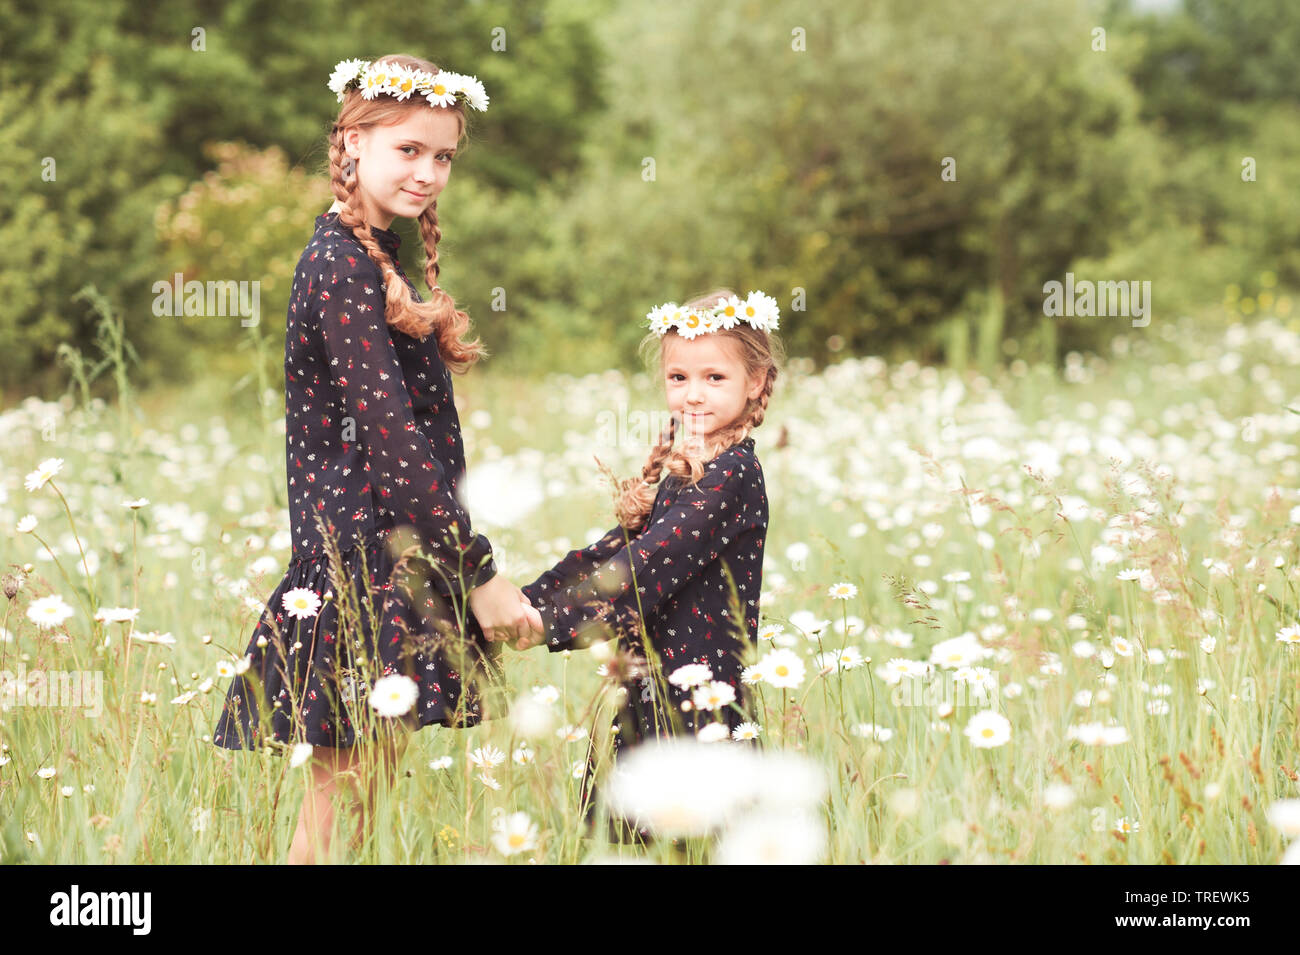 Smiling girls standing in chamomile meadow. Posing outdoors. Looking at camera. Childhood. Stock Photo